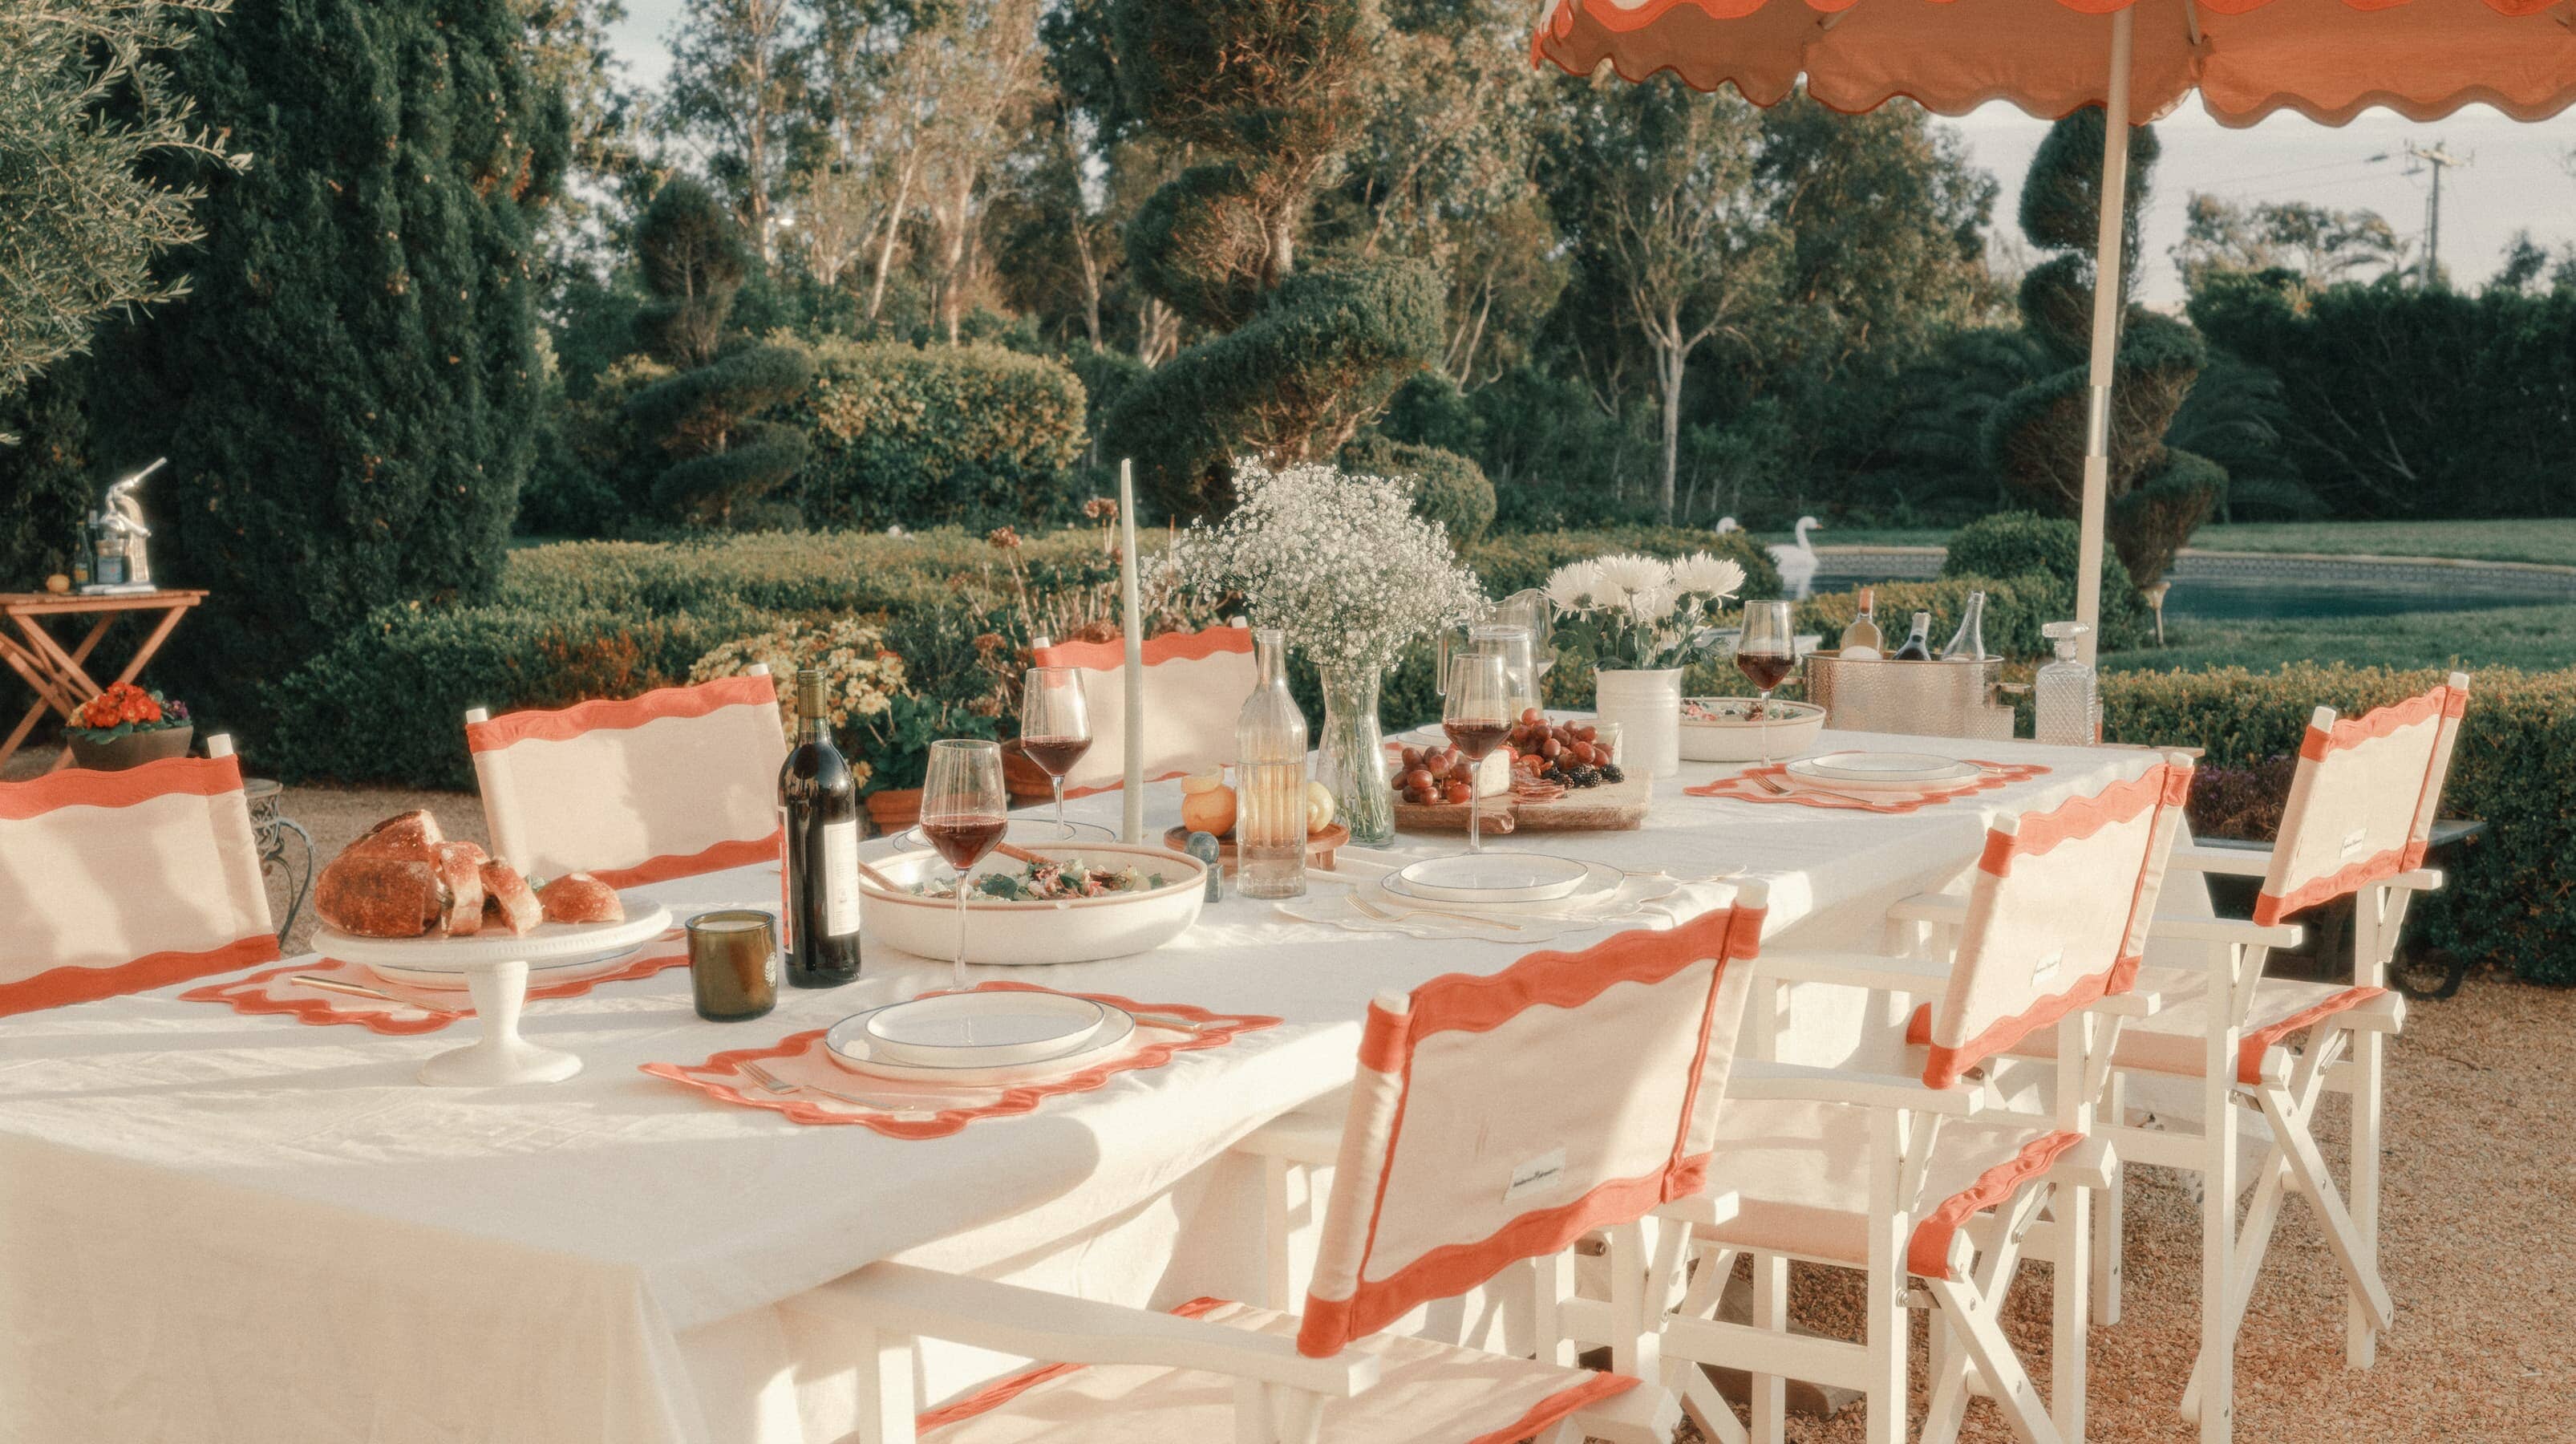 Riviera pink directors chairs and umbrellas at an outdoor dining table